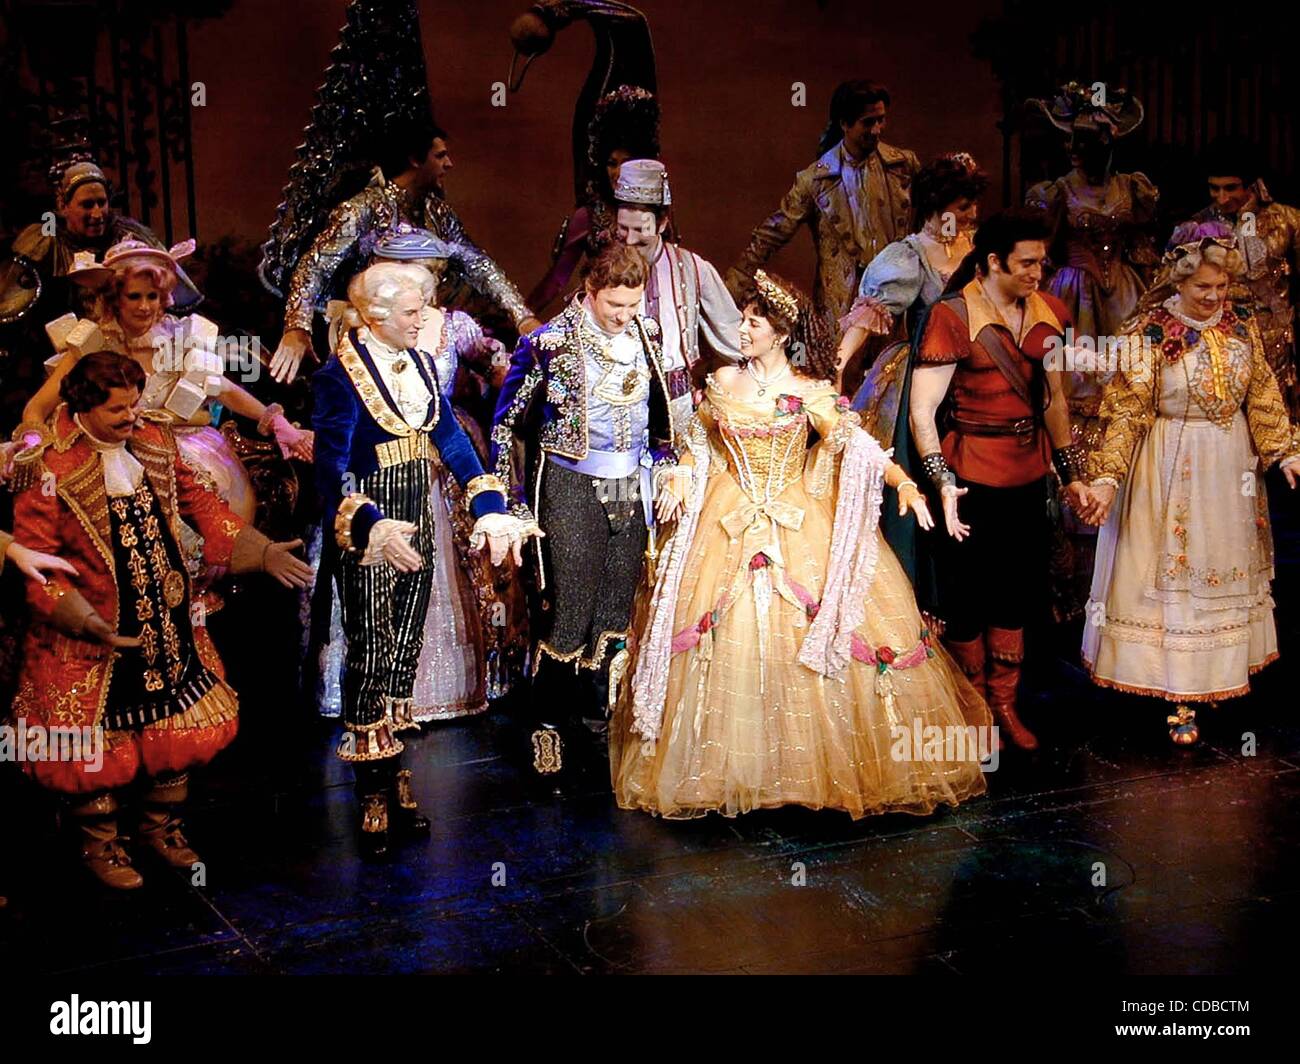 Jan 1 2011 New York New York U S Beauty And The Beast At The Lunt Fontanne Theatre N Y C 12 4 02 Jamie Lynn Sigler Plays Belle 2002 K27907bc Credit Image A C Bruce Cotler Globe Photos Zumapress Com